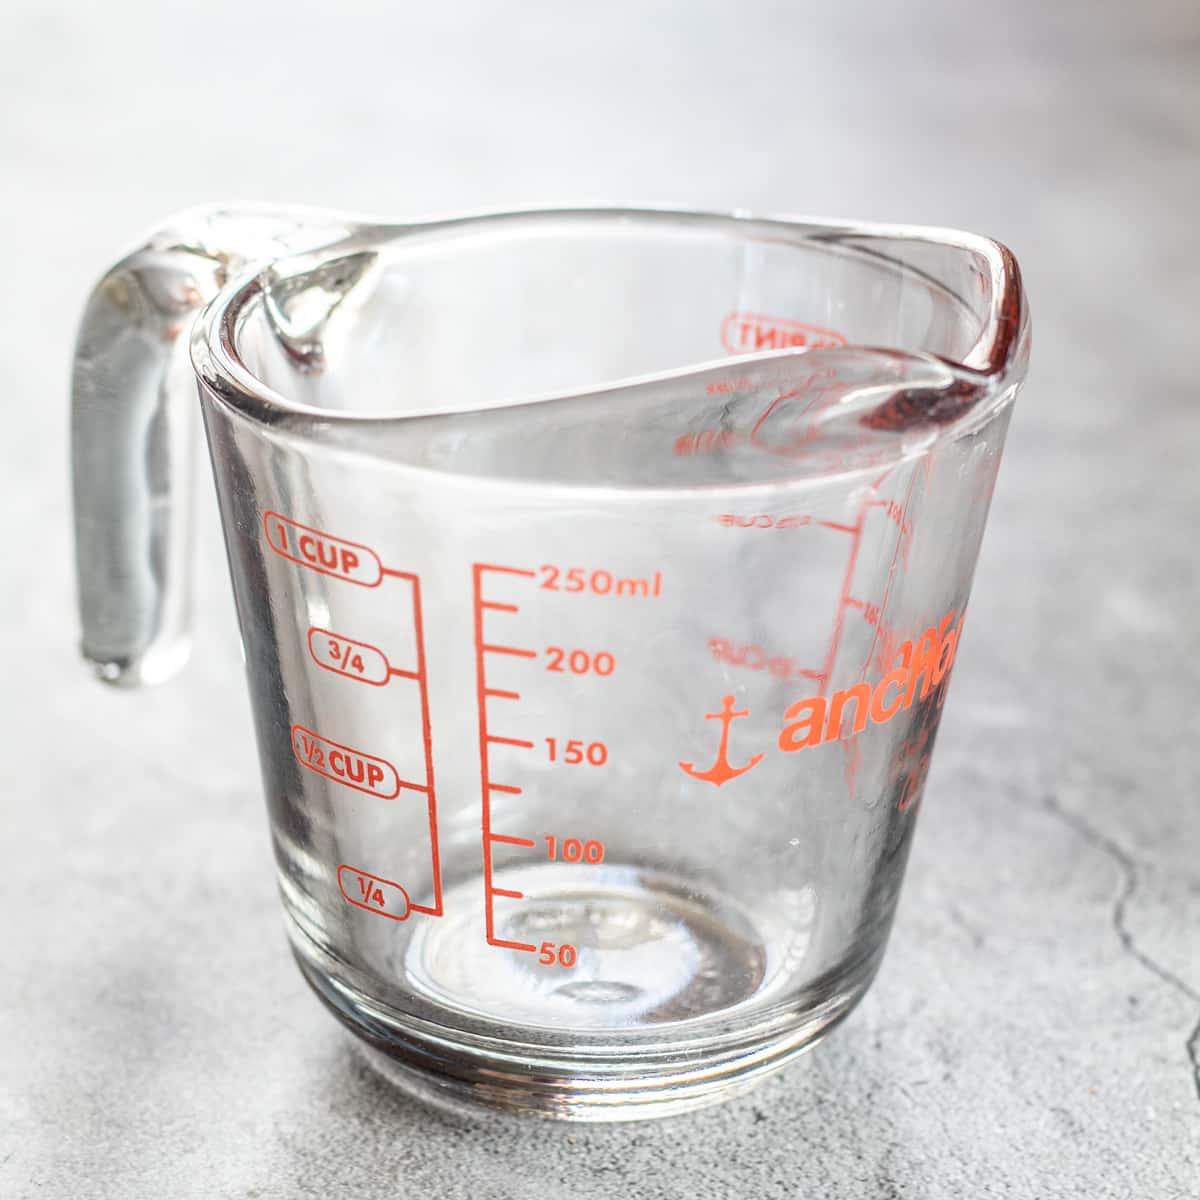 How many milliters ml in a cup with a glass pyrex liquid measuring cup on light surface.